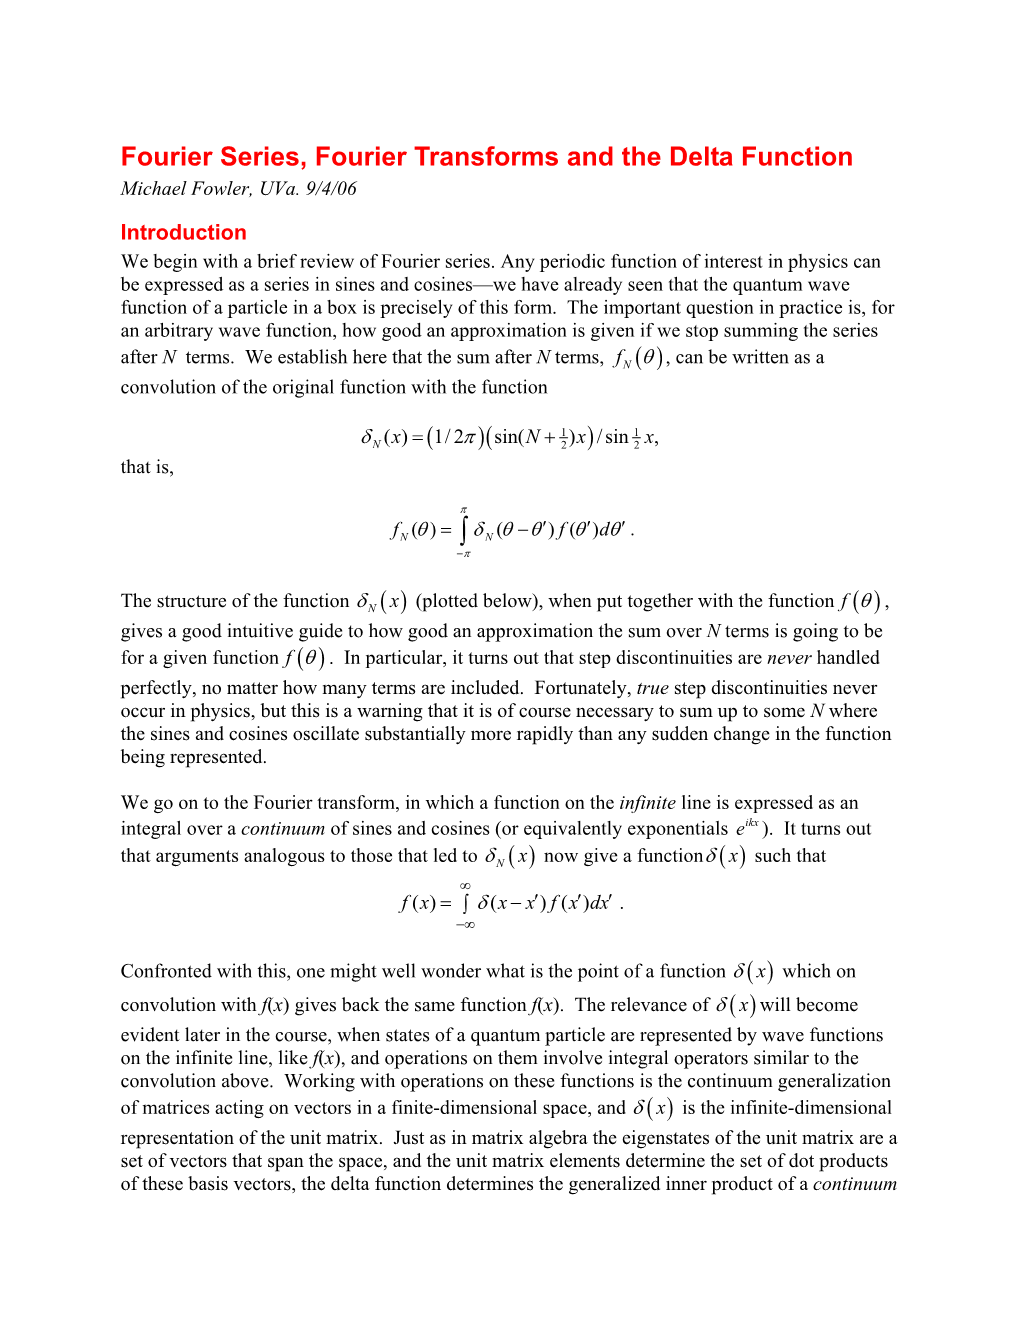 Fourier Series, Fourier Transforms and the Delta Function Michael Fowler, Uva